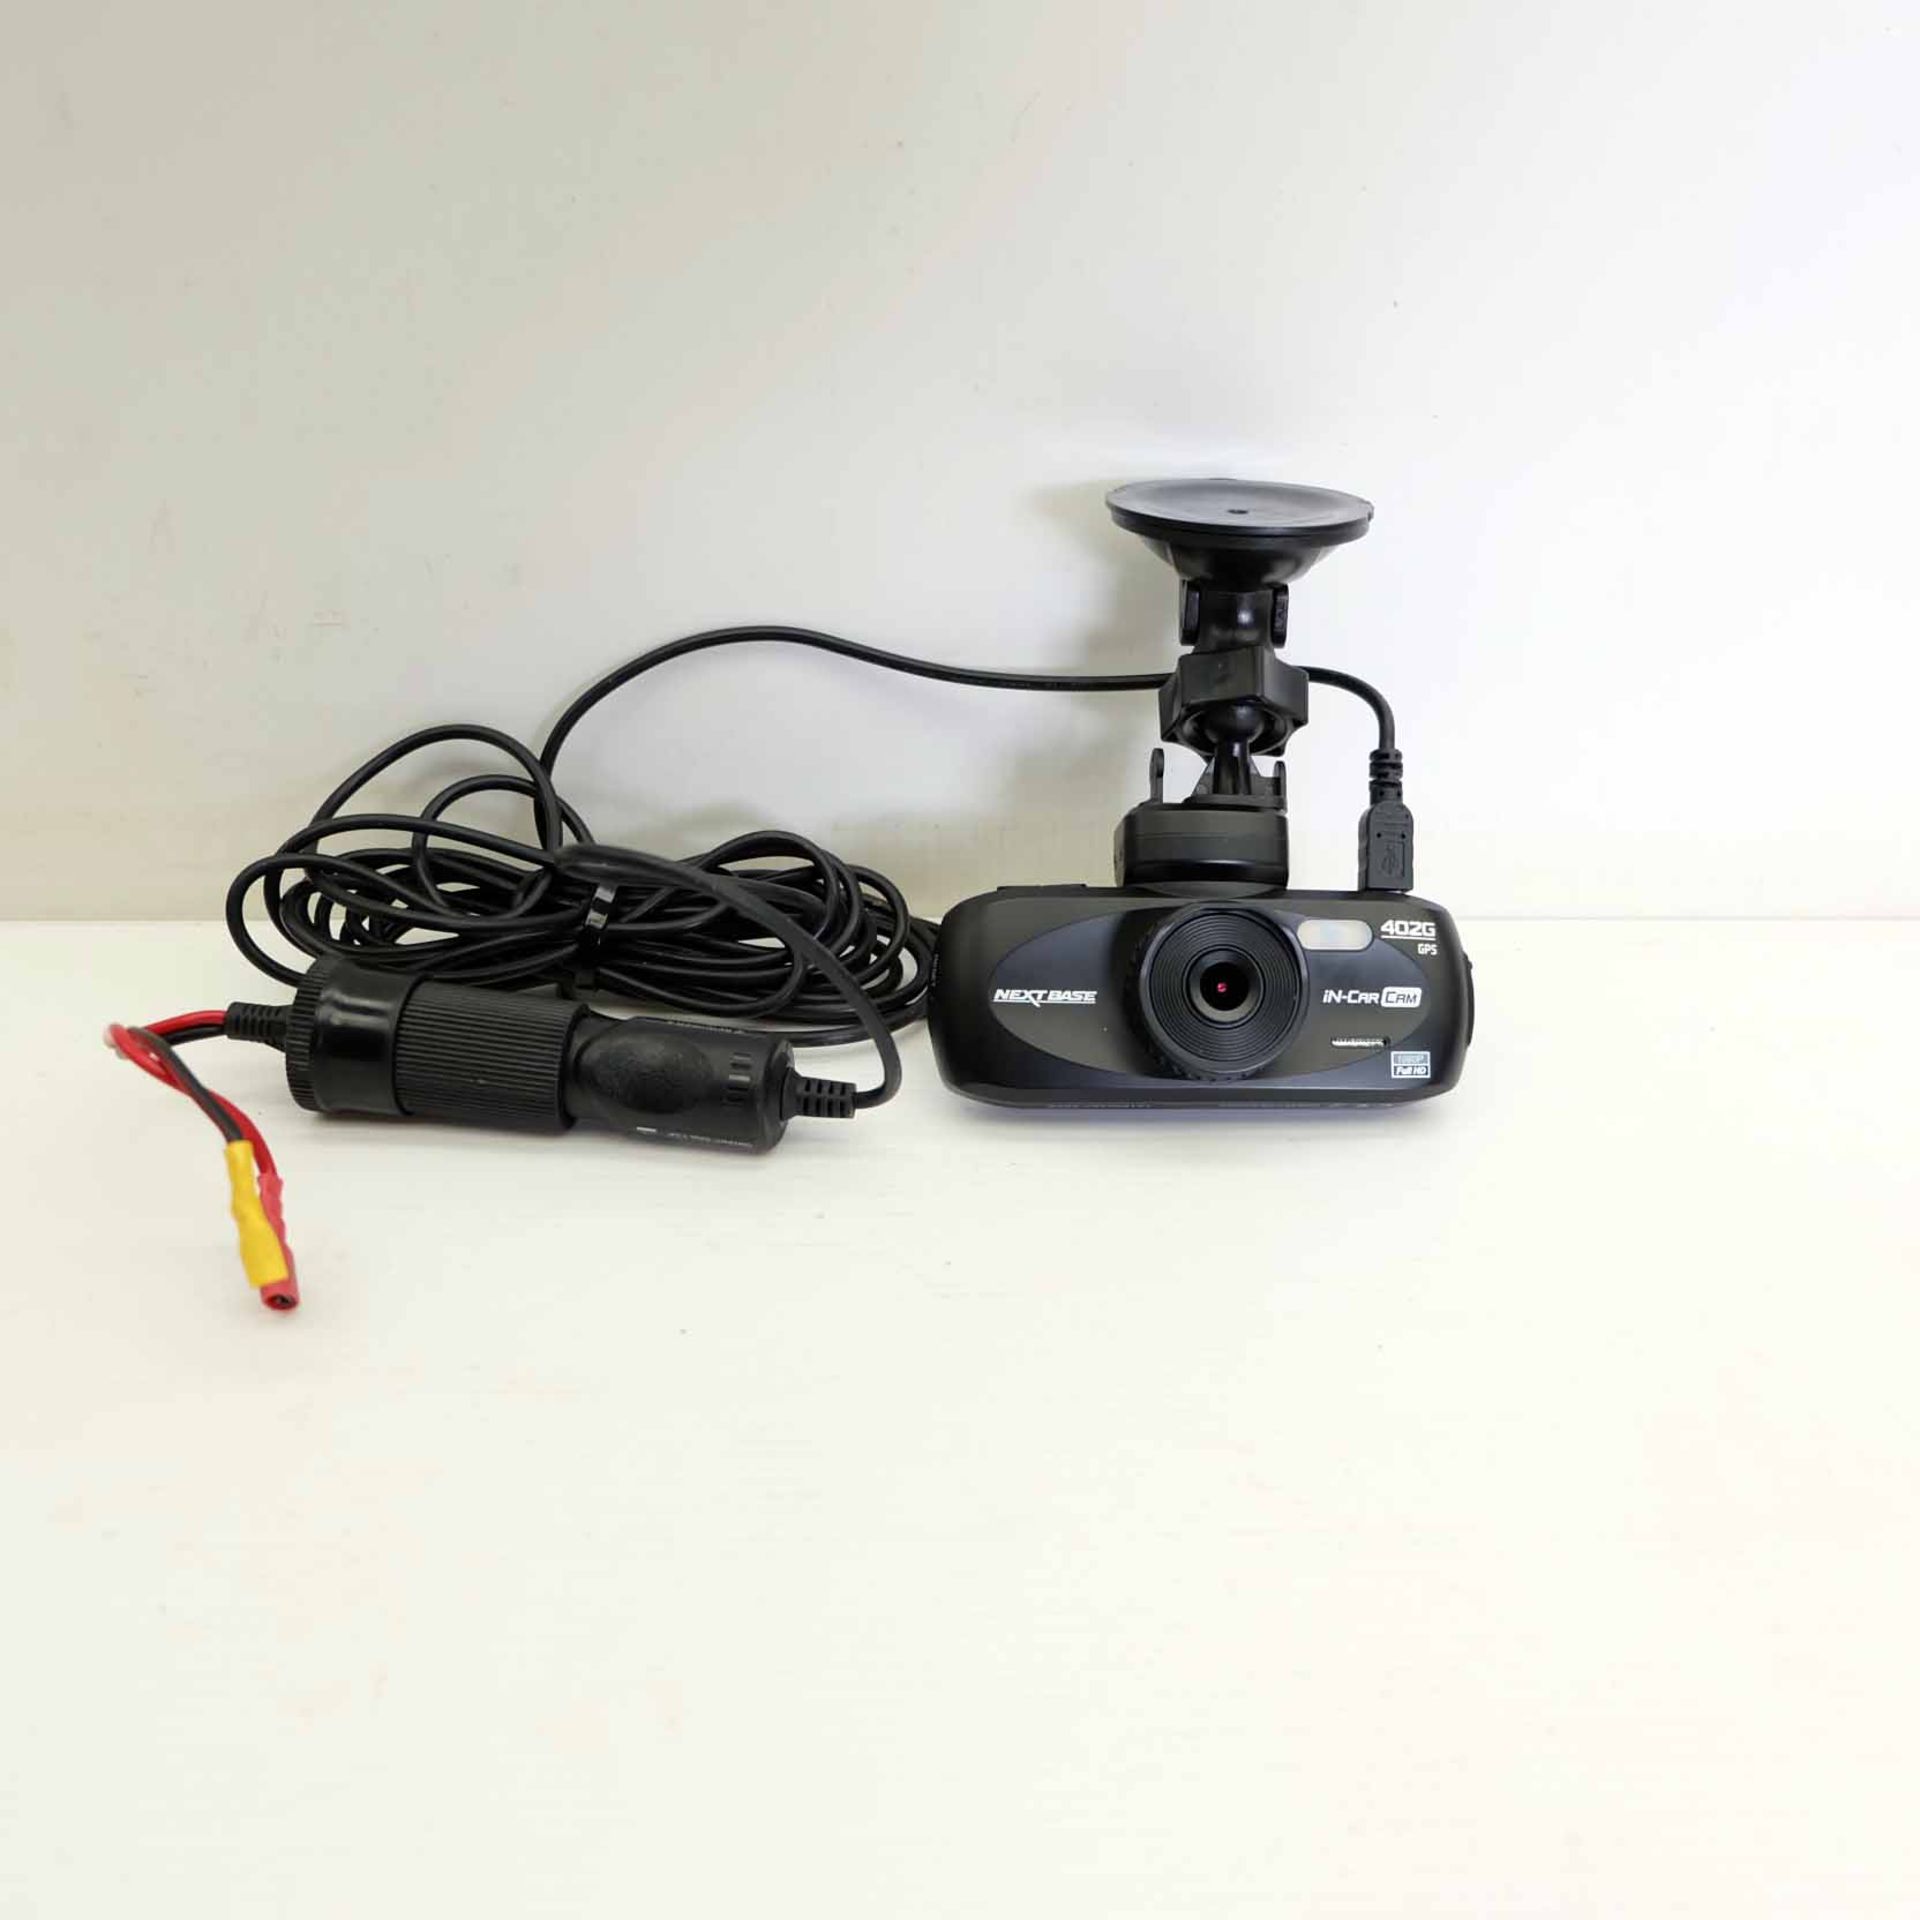 Next Base In-Car Cam 402G GPS. With Battery Connector for 12V. Complete With Outdoor Case. - Image 8 of 11